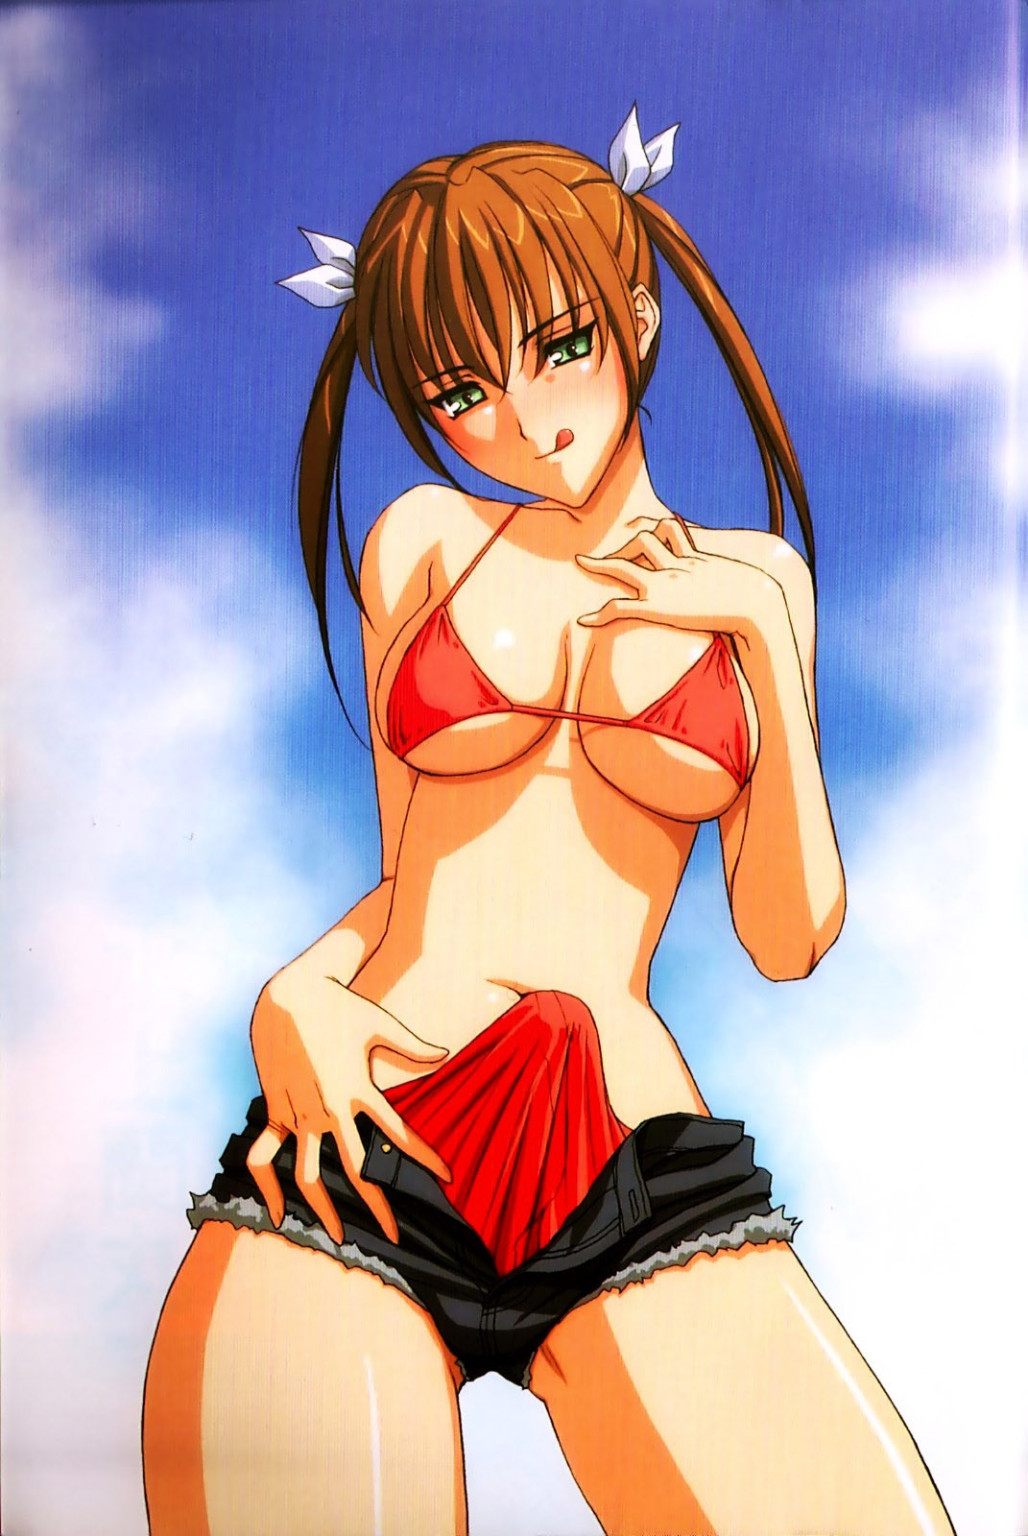 Anime shemales in swimsuits
 #69354641